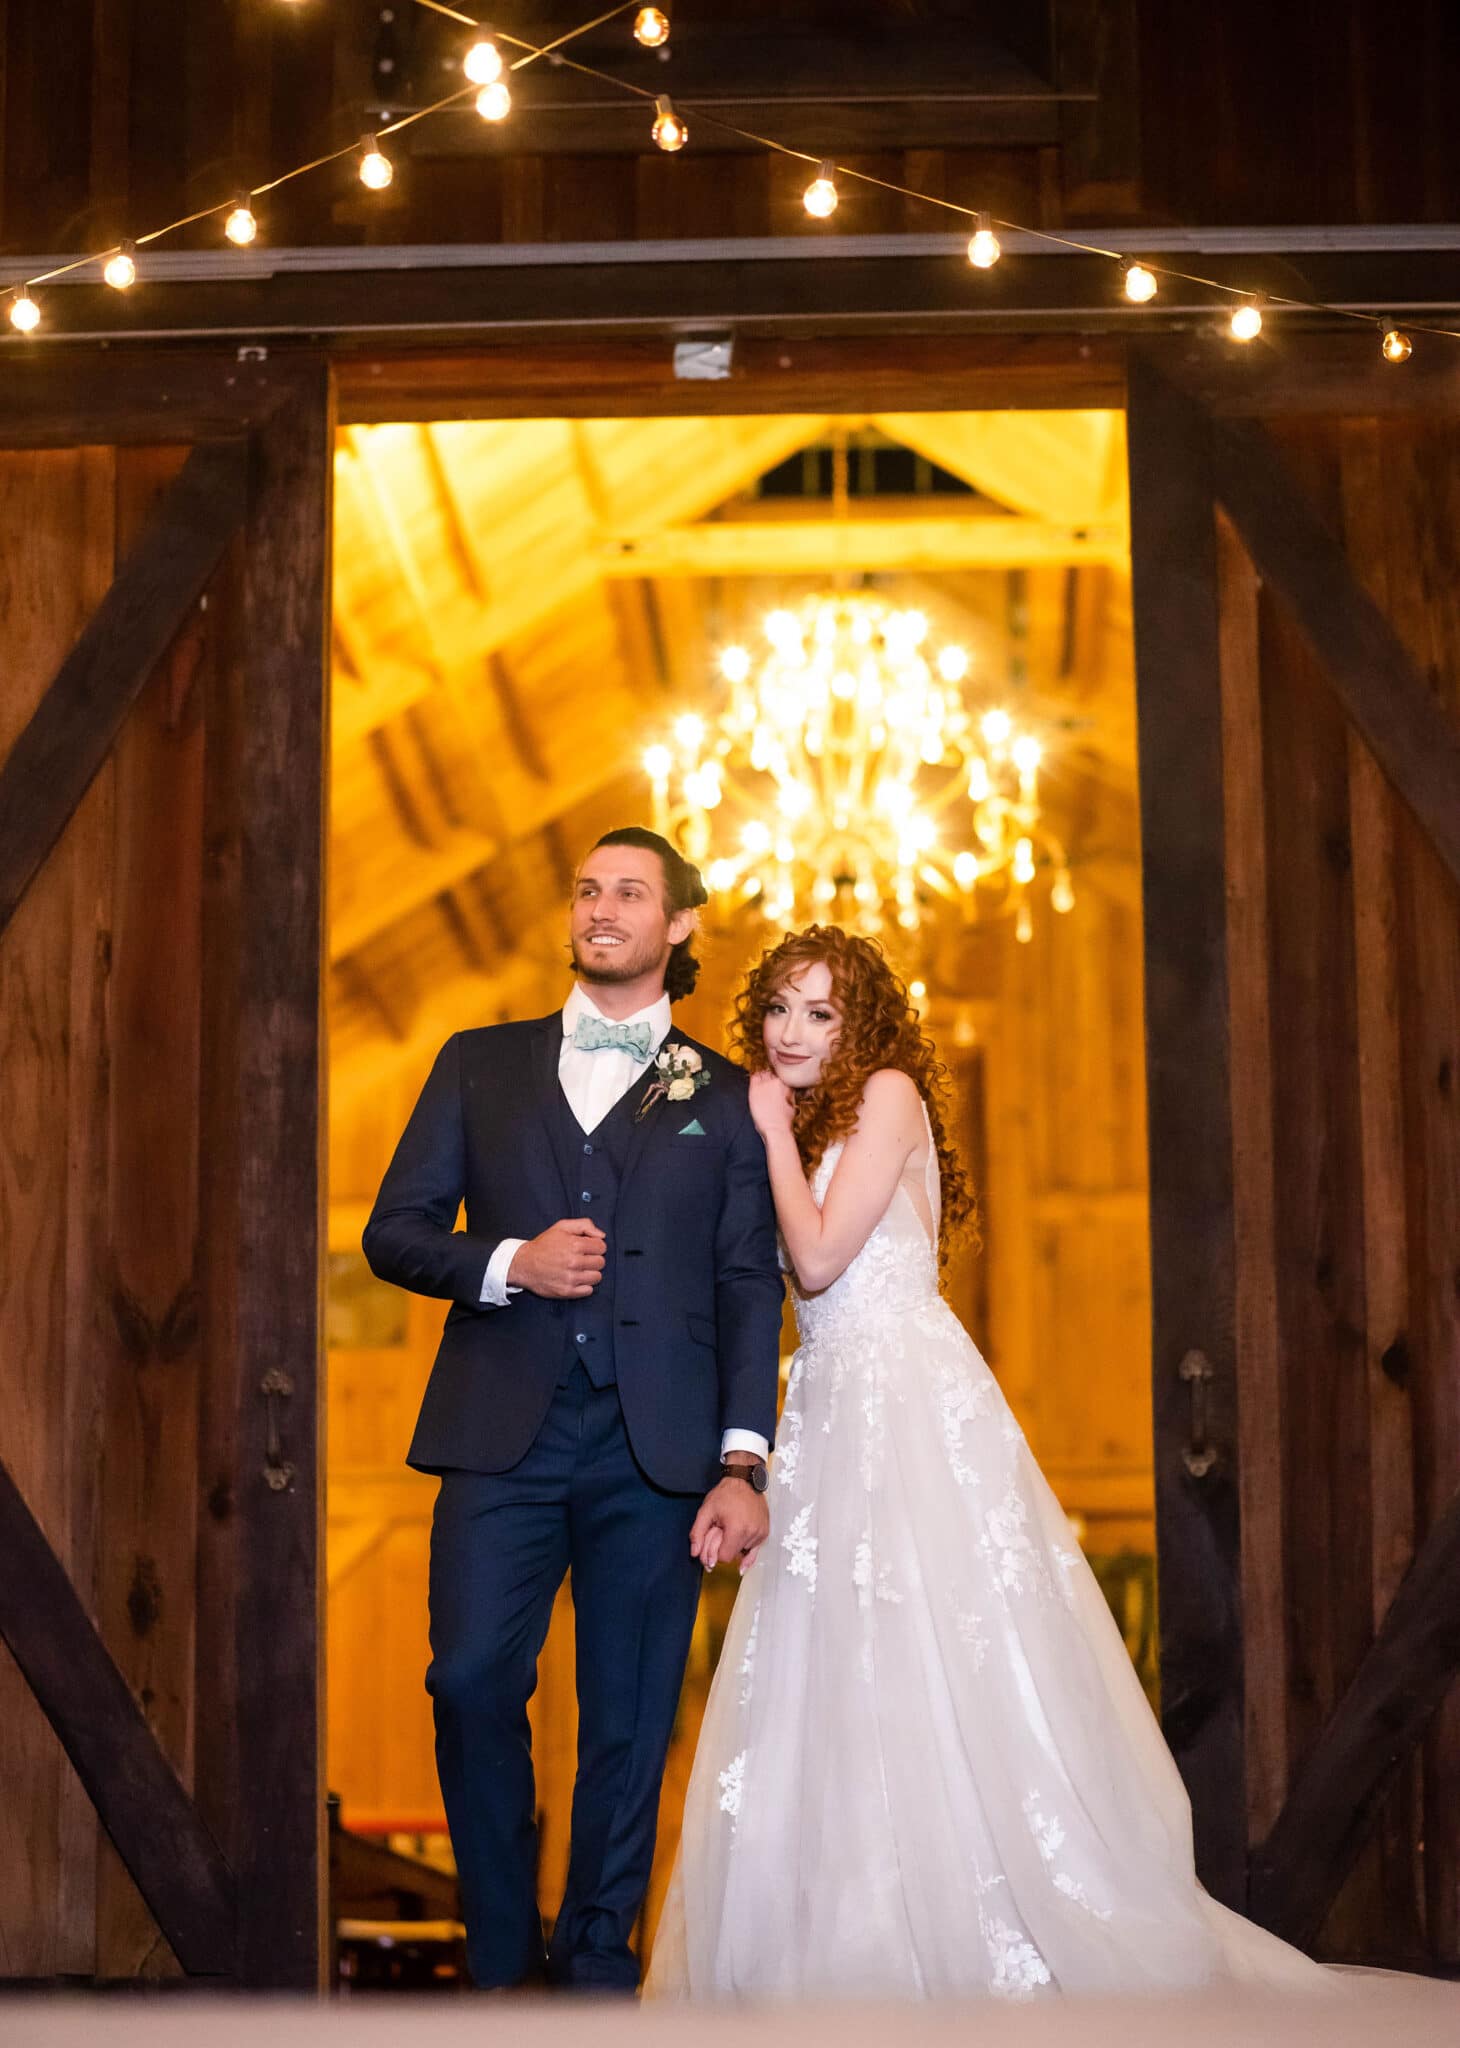 married couple at wedding outside of barn reception space looking off into the distance with big chandelier hanging inside behind them